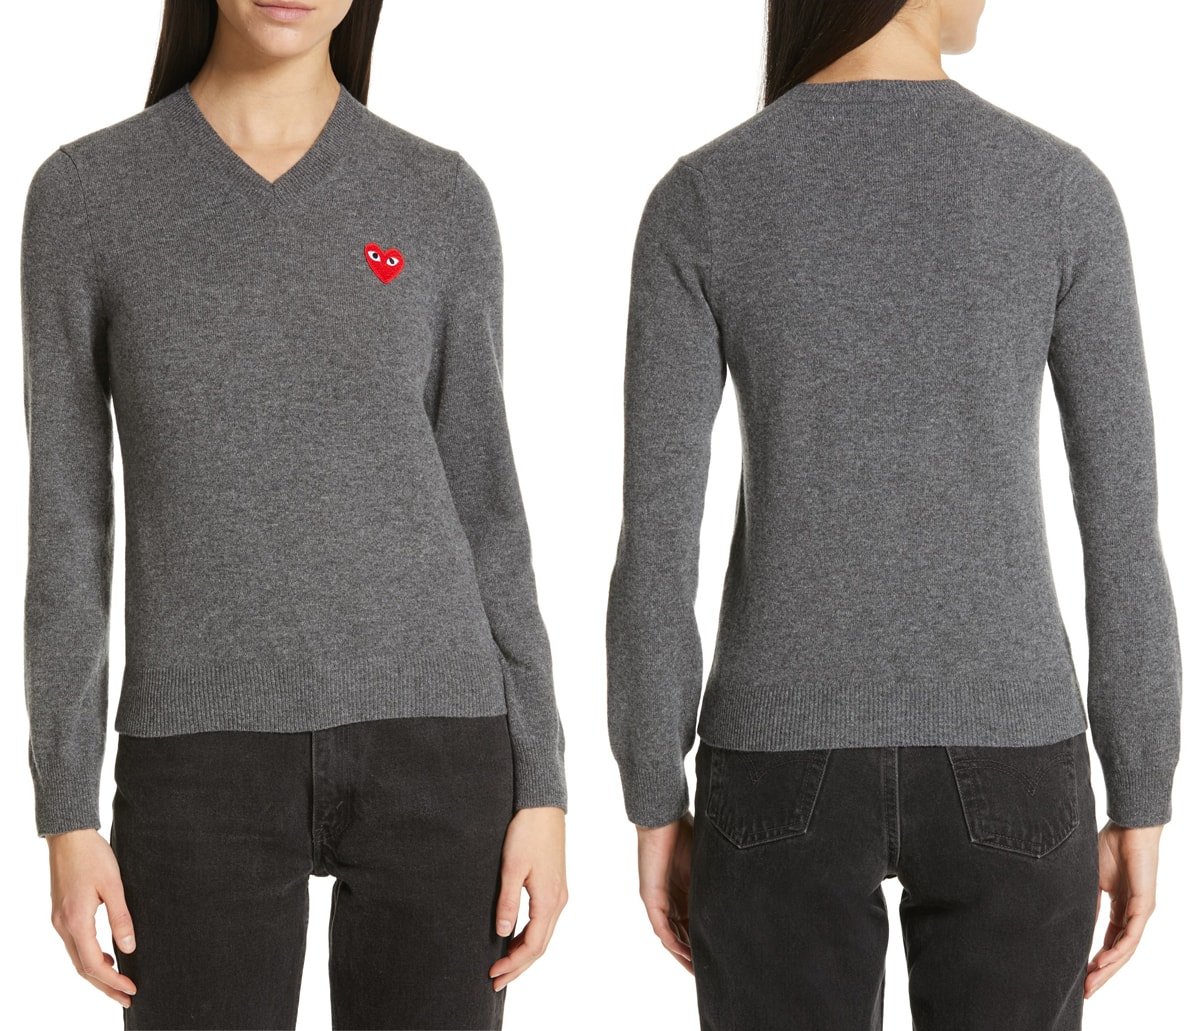 The iconic PLAY heart logo graces the chest of this lightweight wool sweater